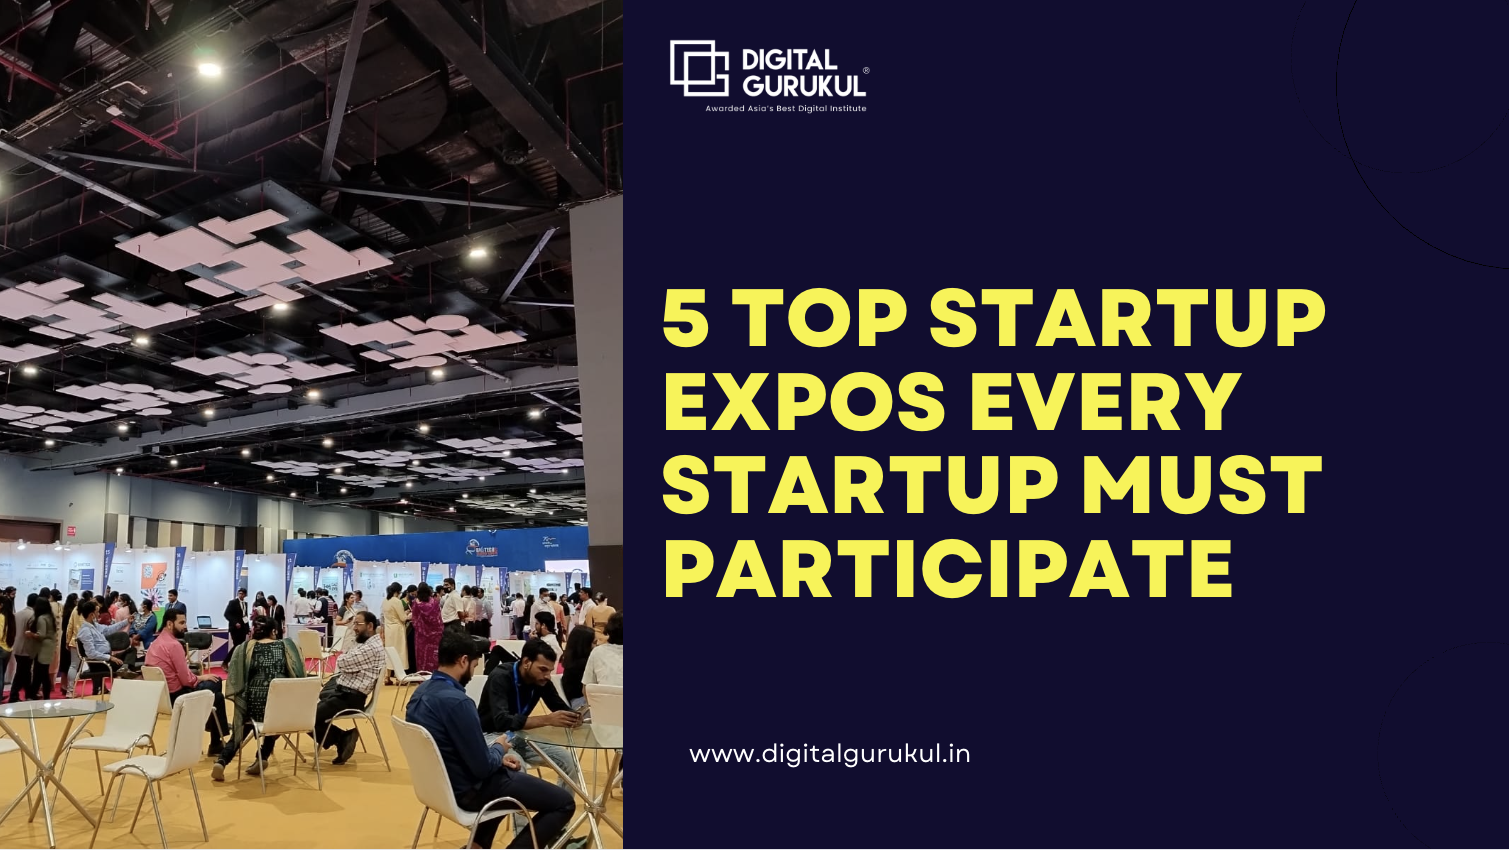 5 Top startup expos every startup must participate